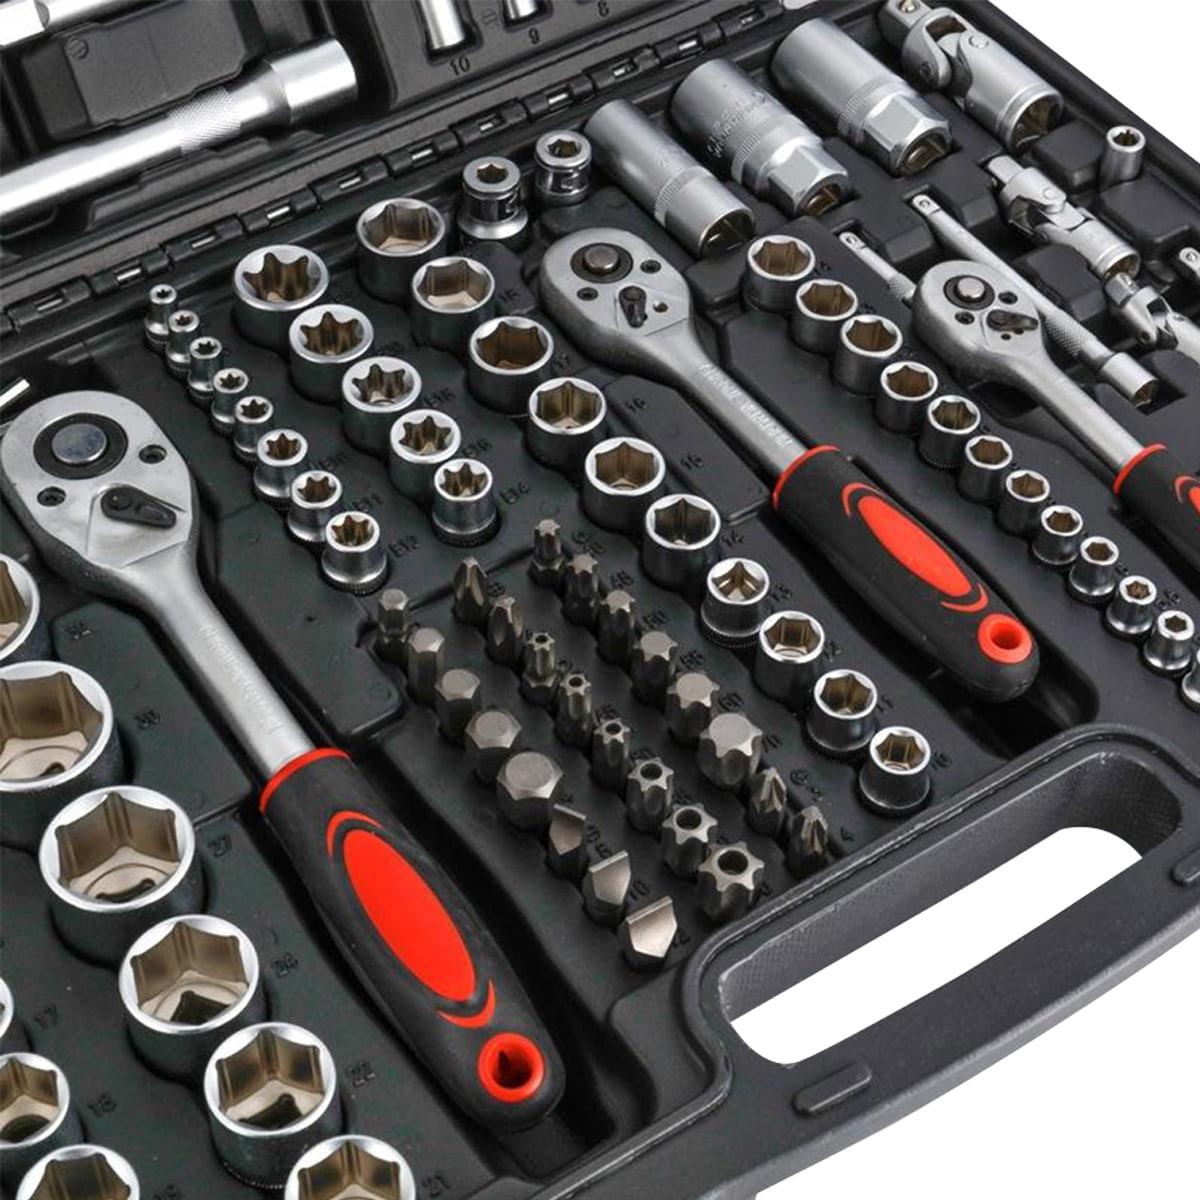 171 Pcs Professio Multifunctional Wrench Tool Combination Spanner Socket Set For Car Repair